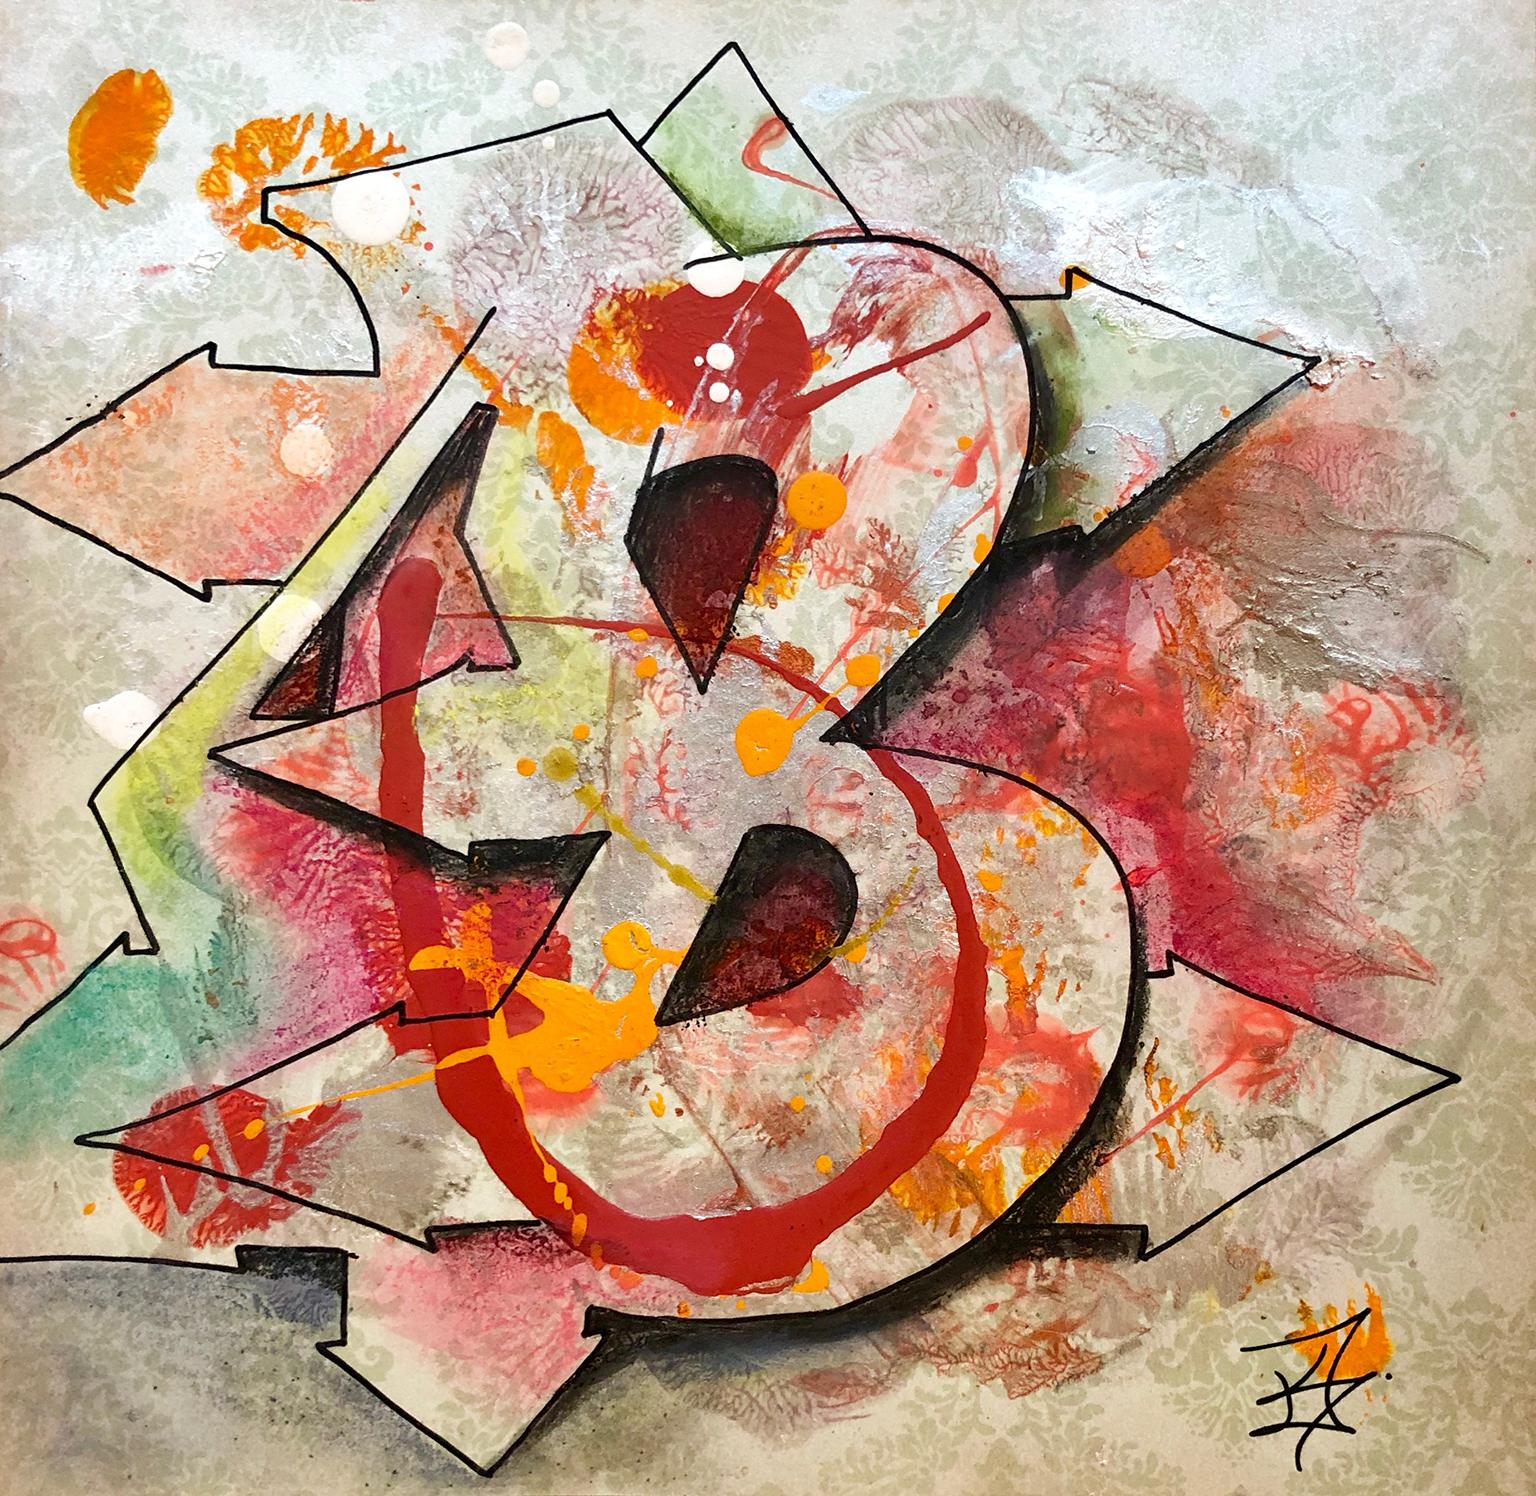 Kel1st Abstract Print - Kelography Letters (Graffiti "B" Urban Graphic) / Limited ed. 25 